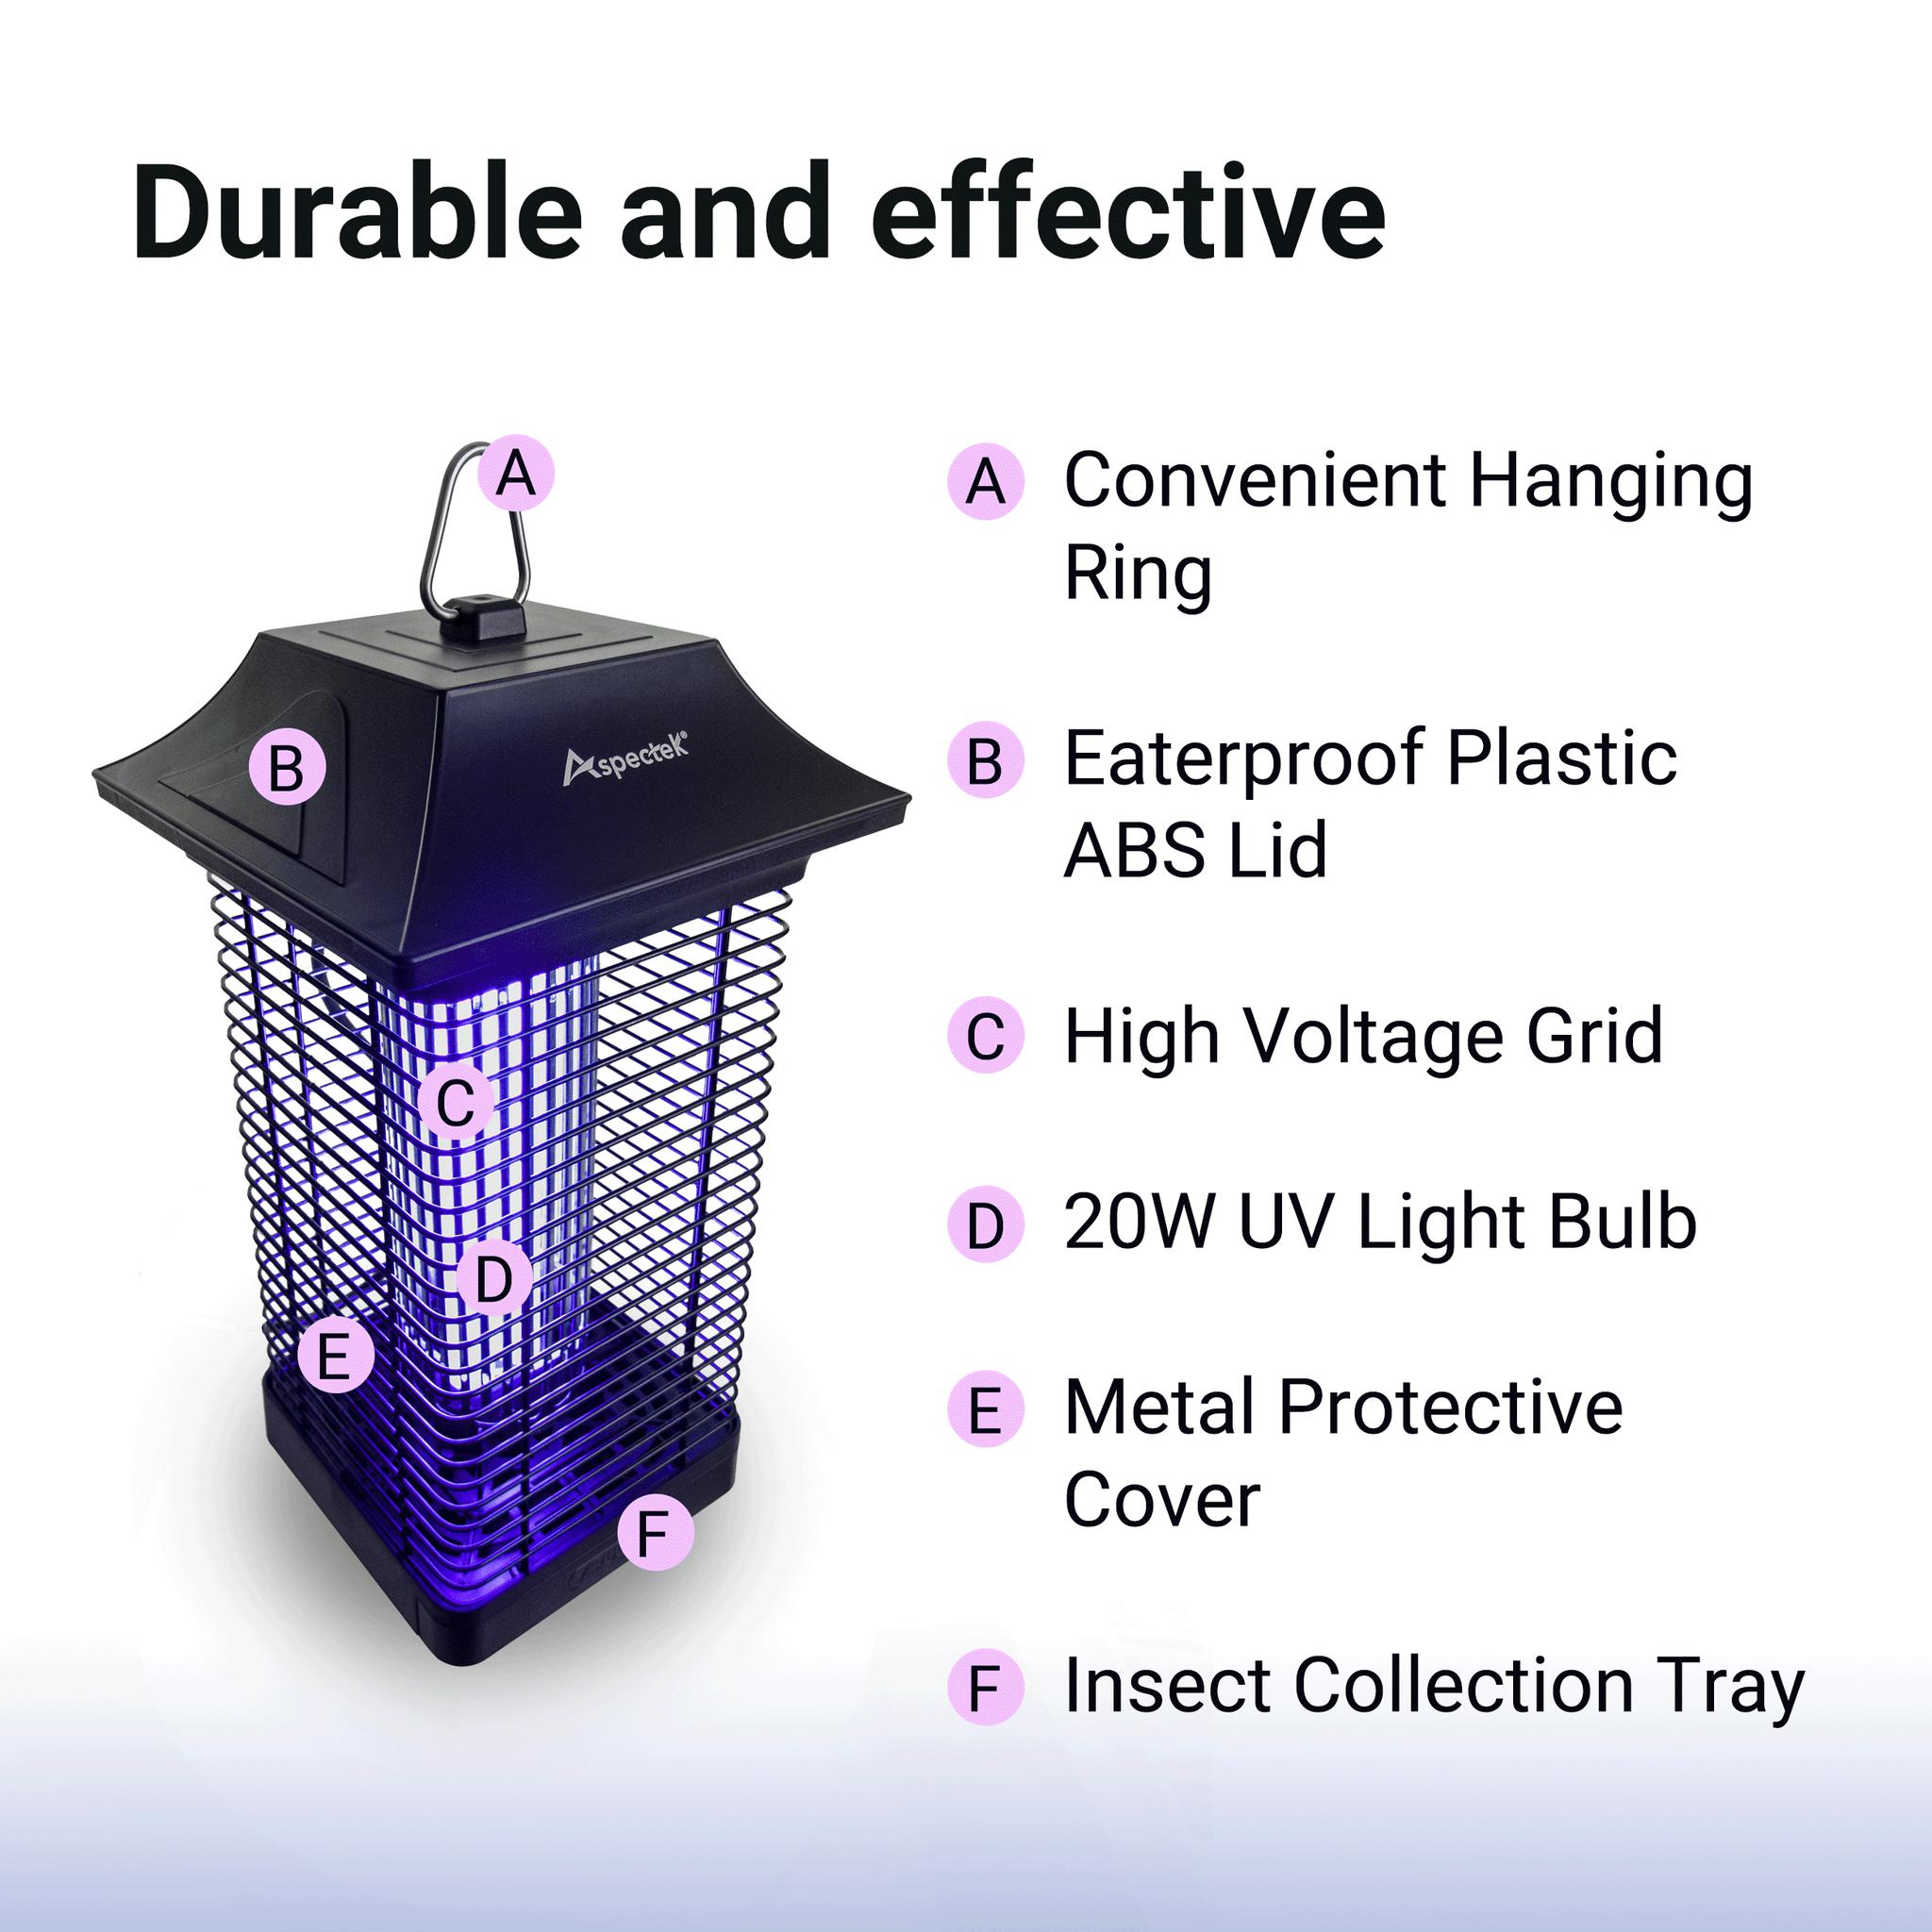 Aspectek Electric Bug Zapper Outdoor, Powerful Mosquito Zapper 20W, Insect Fly Zapper Indoor, UV Light Fly Killer for Home Patio Backyard Camping, Waterproof, Up to 1000sq. FT Coverage (Square)